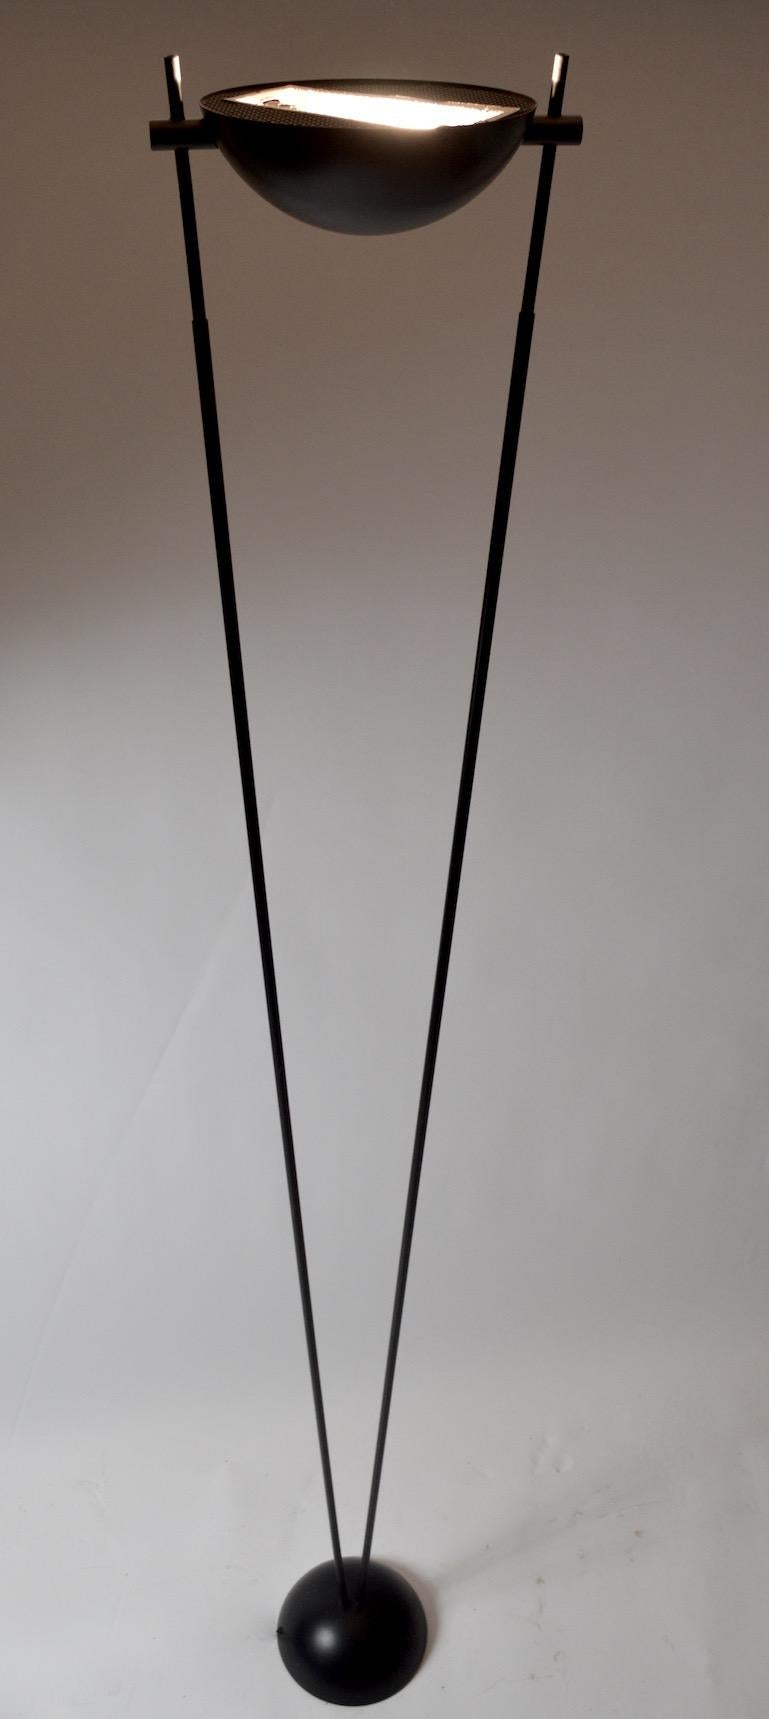 Graphic Minimalist black metal halogen uplight torchiere made in Milan (Milano) Italy. Period Post Modern 1980s Italian lighting design. The lamp has an in line on/off dimmer switch, which is marked with the RELUX brand, as pictured. Bowl shade